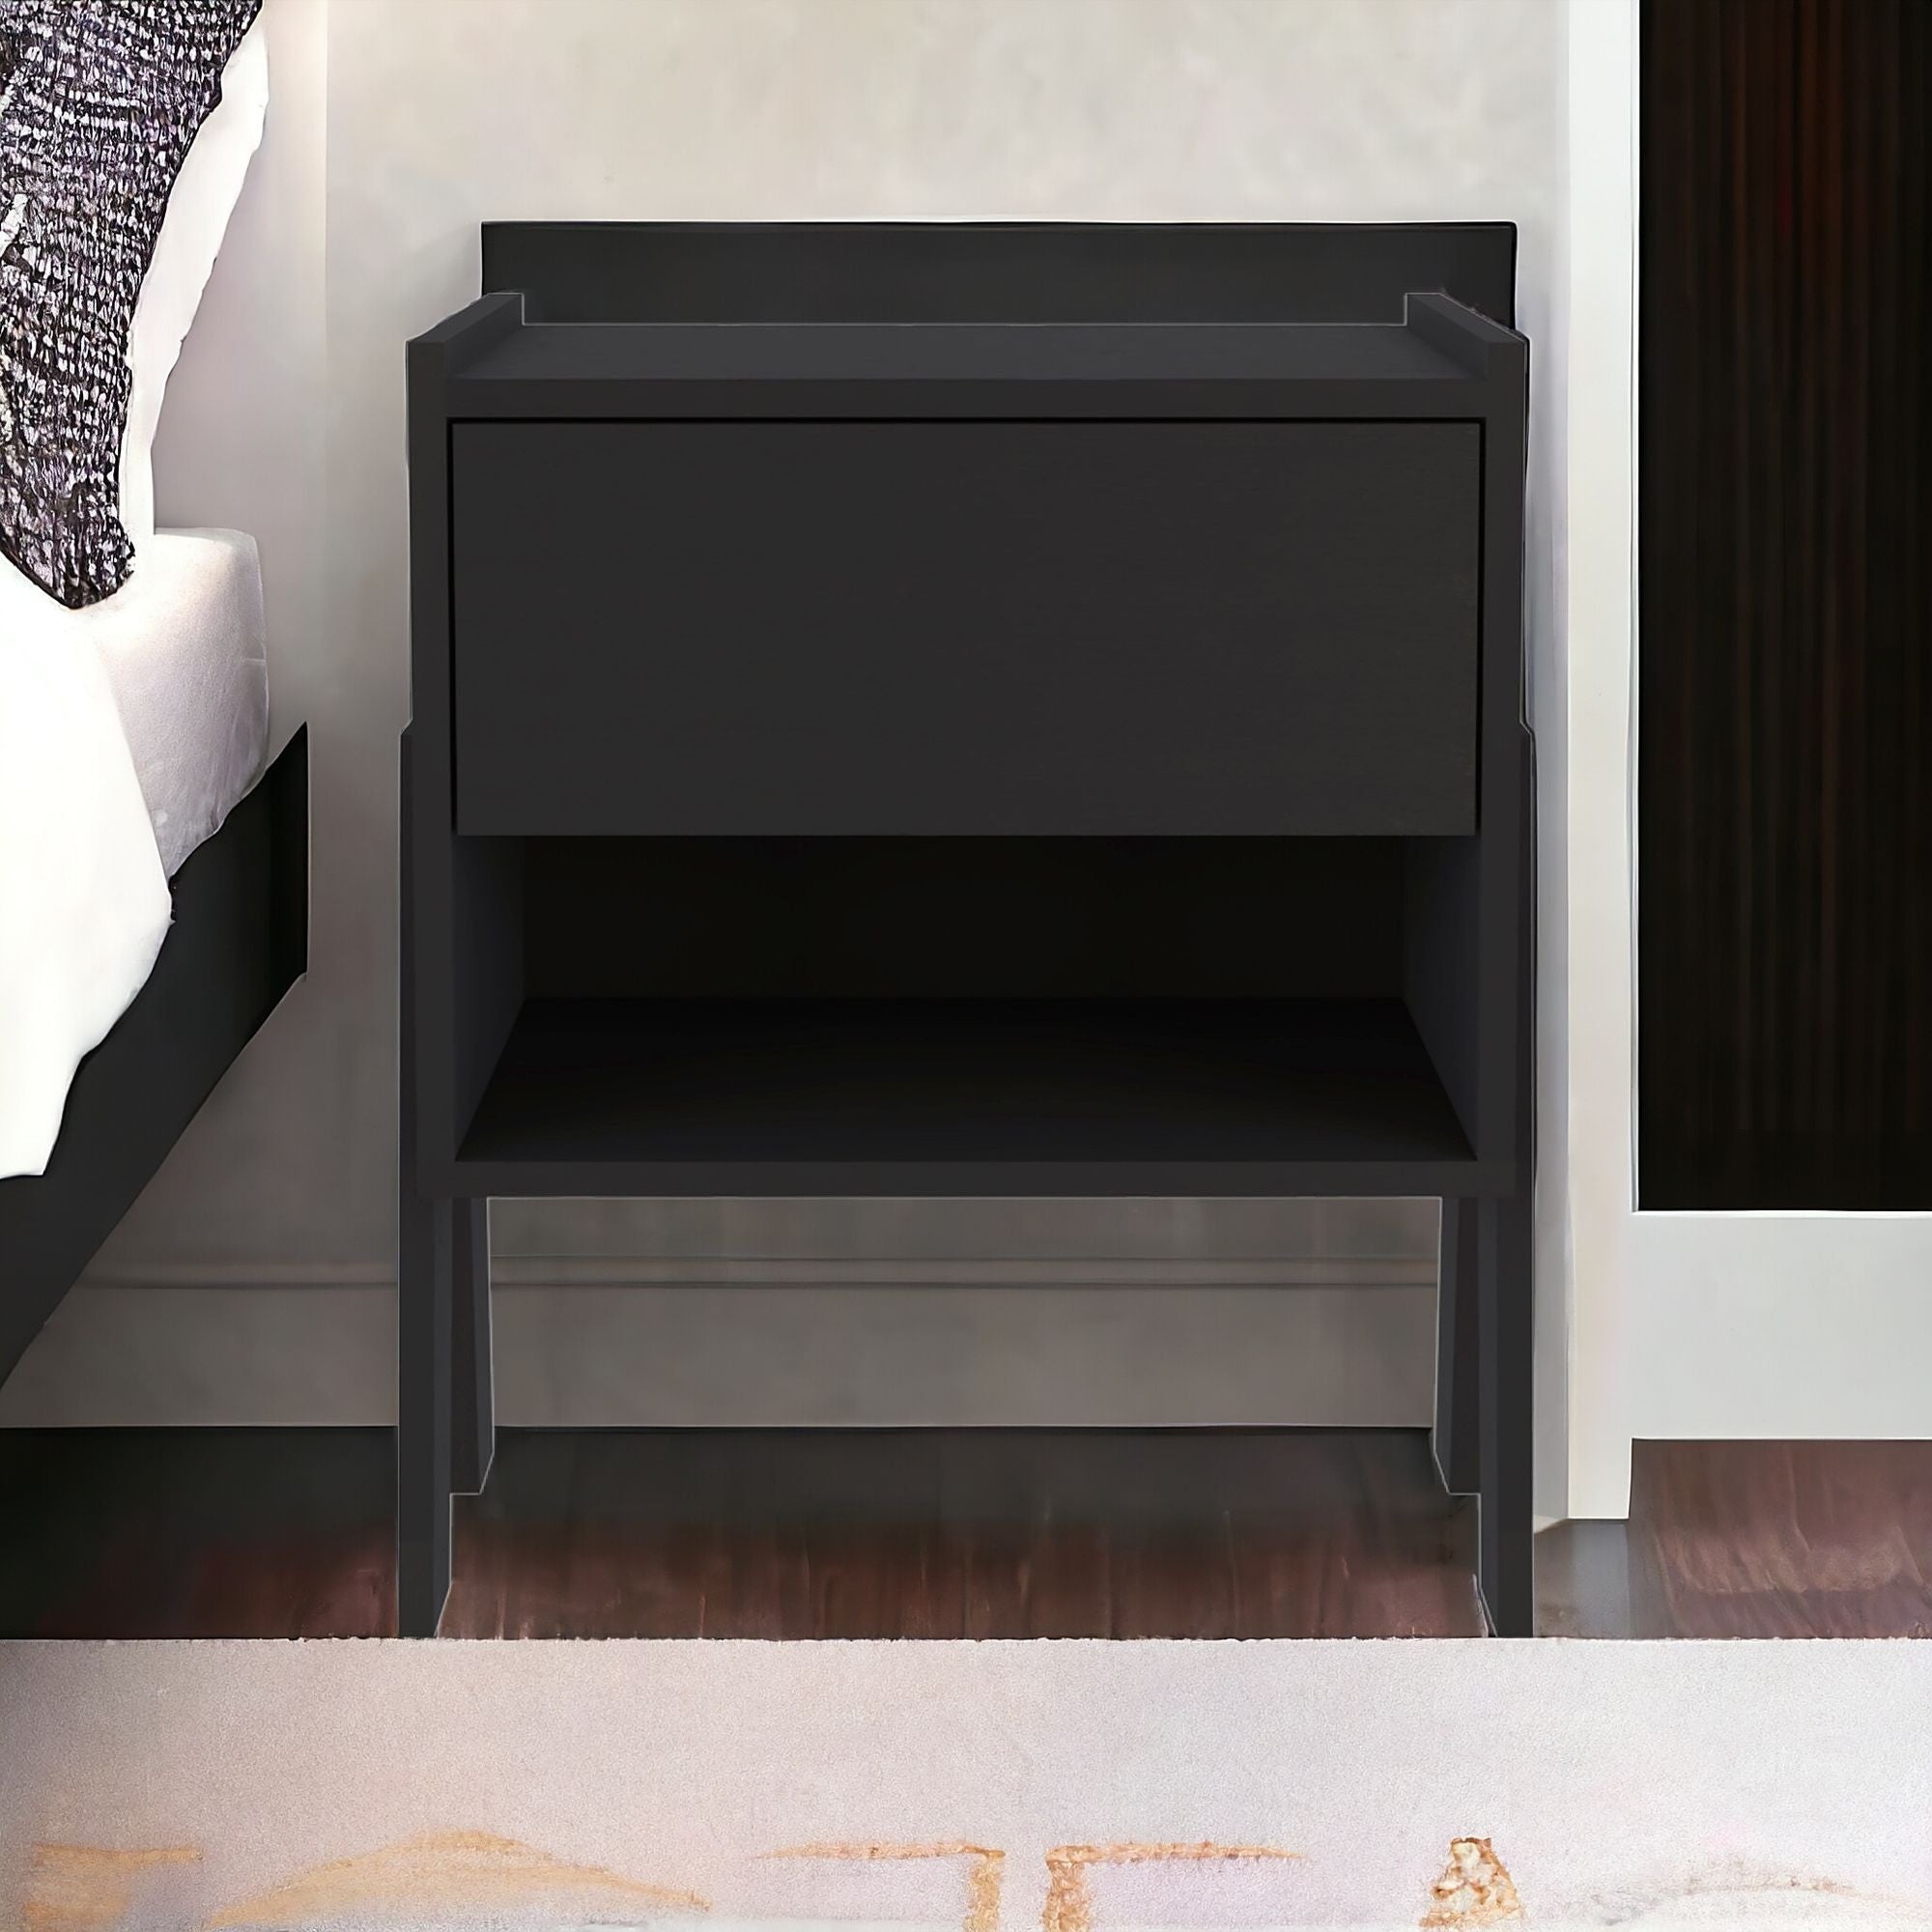 22" Black One Drawer Faux Wood Nightstand